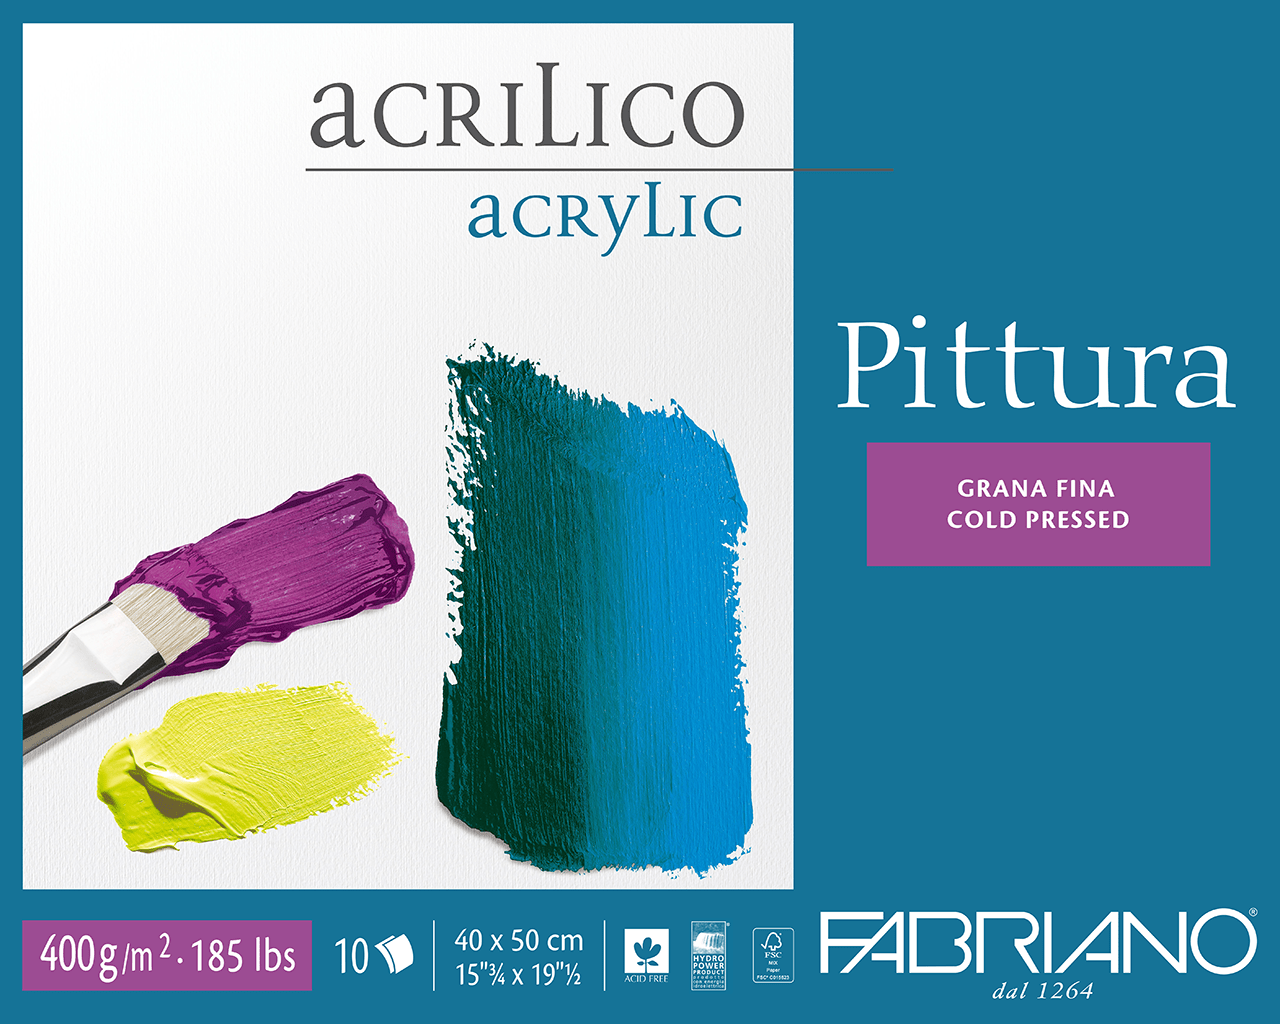 Pittura, paper ideal for acrylics, oil, and tempera